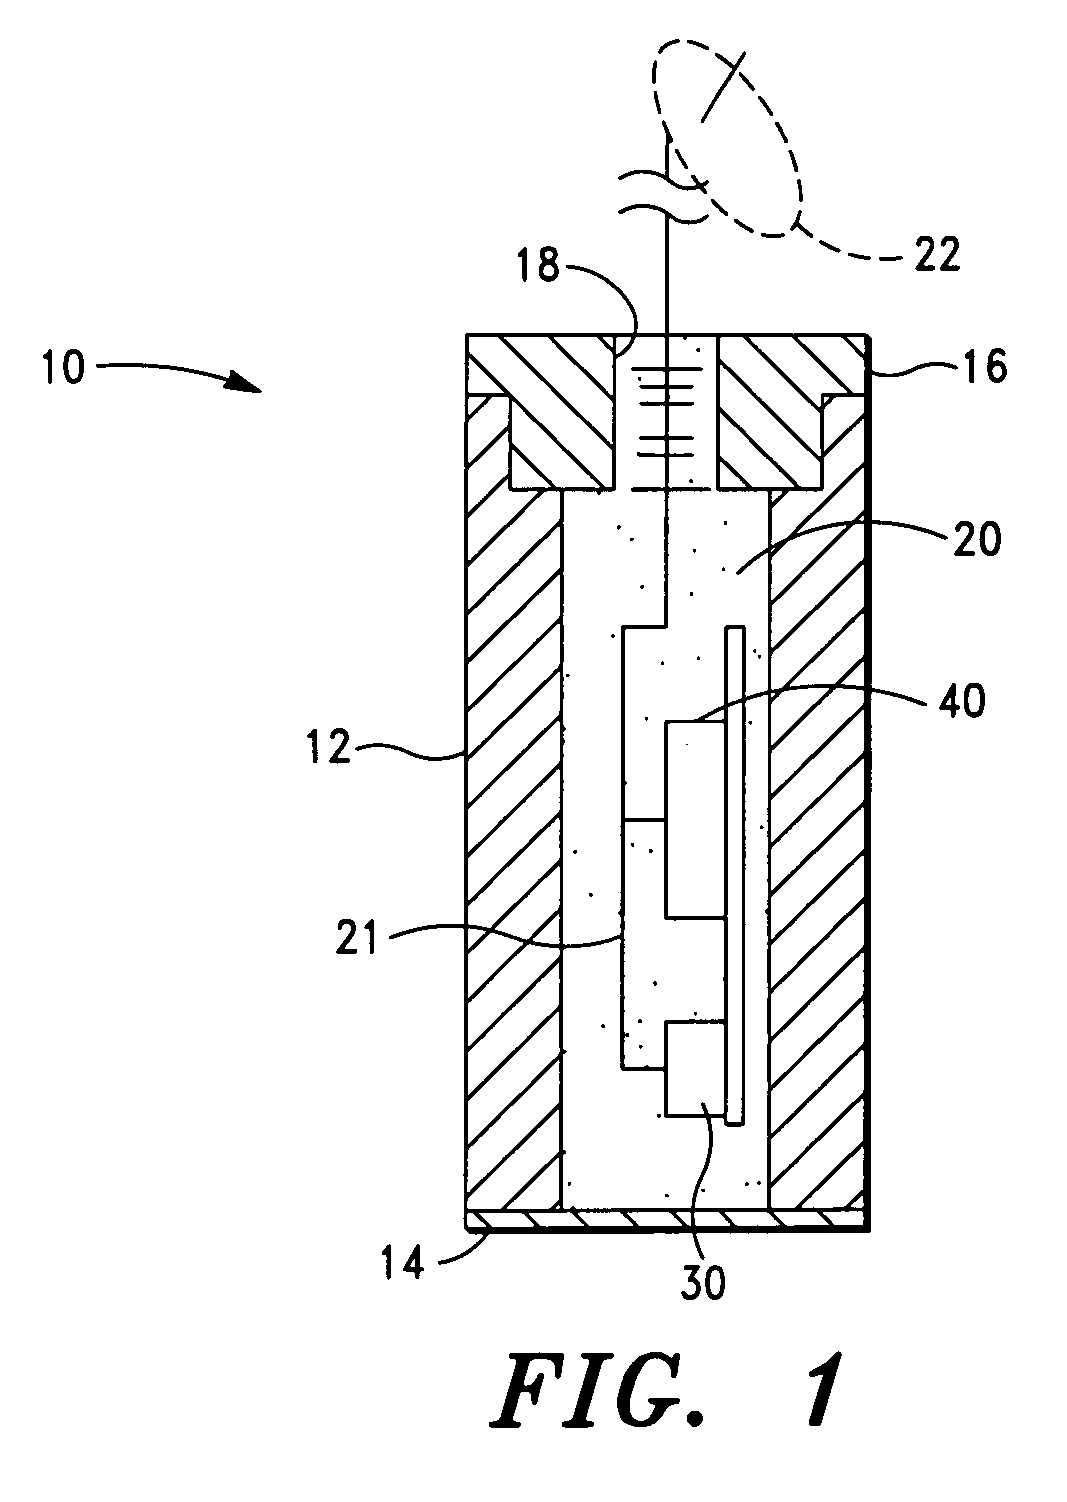 Method and system for monitoring pressure in a body cavity